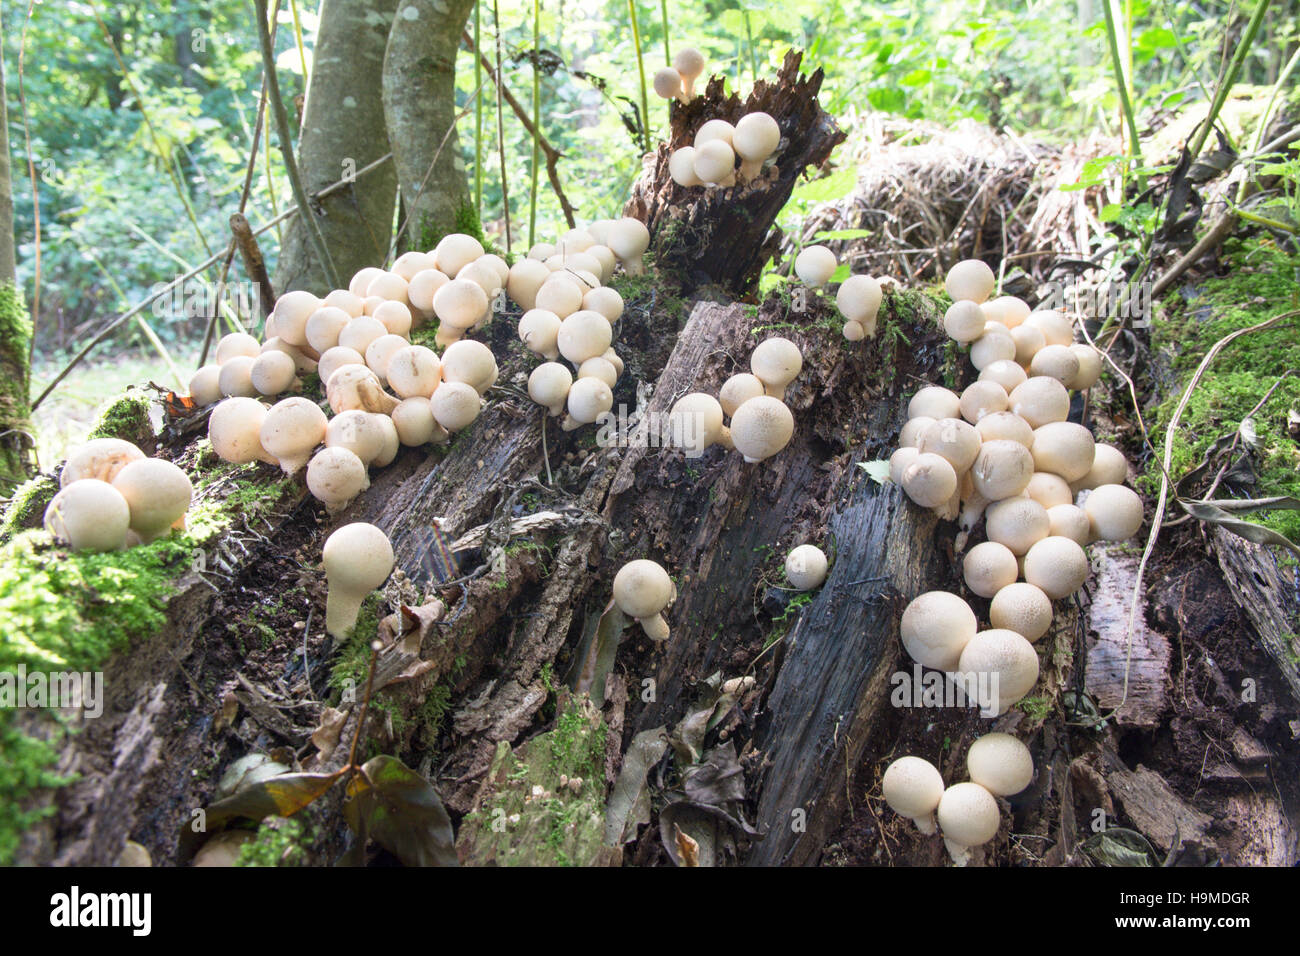 Pear-shaped Puffball or Stump Puffball (Lycoperdon pyriforme) October UK. Many growing in a clump on an old stump. Stock Photo